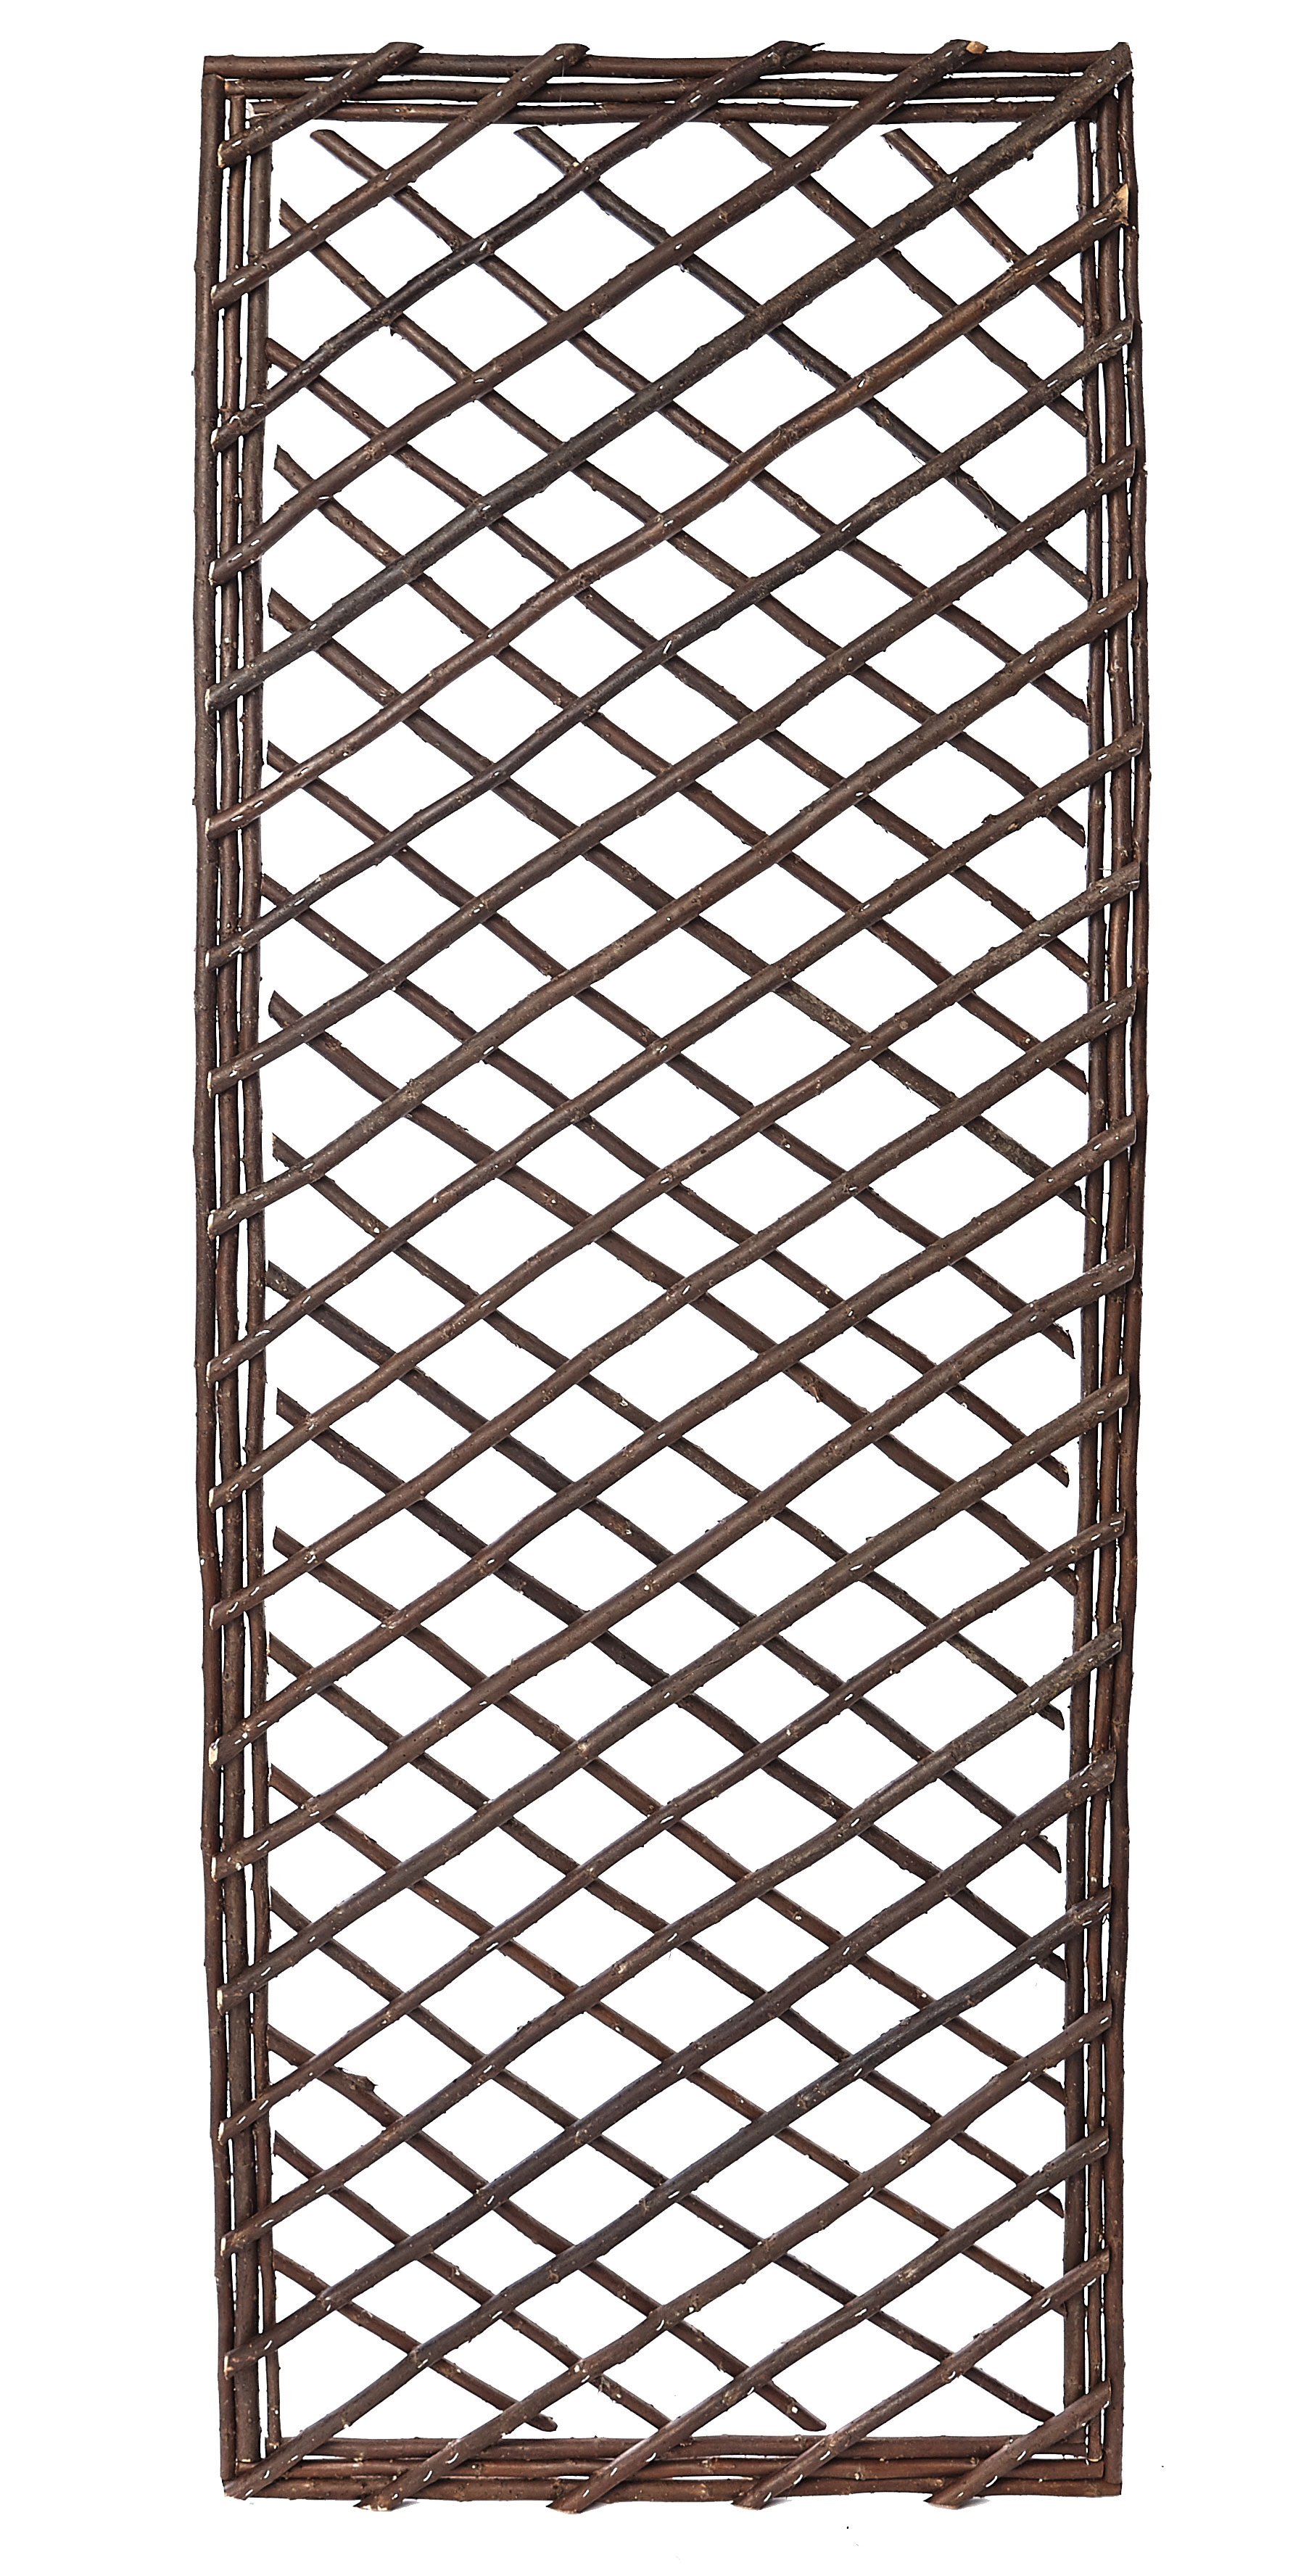 Set of 4 Extra Strong Willow Garden Wall Trellis Panels UK Garden Products